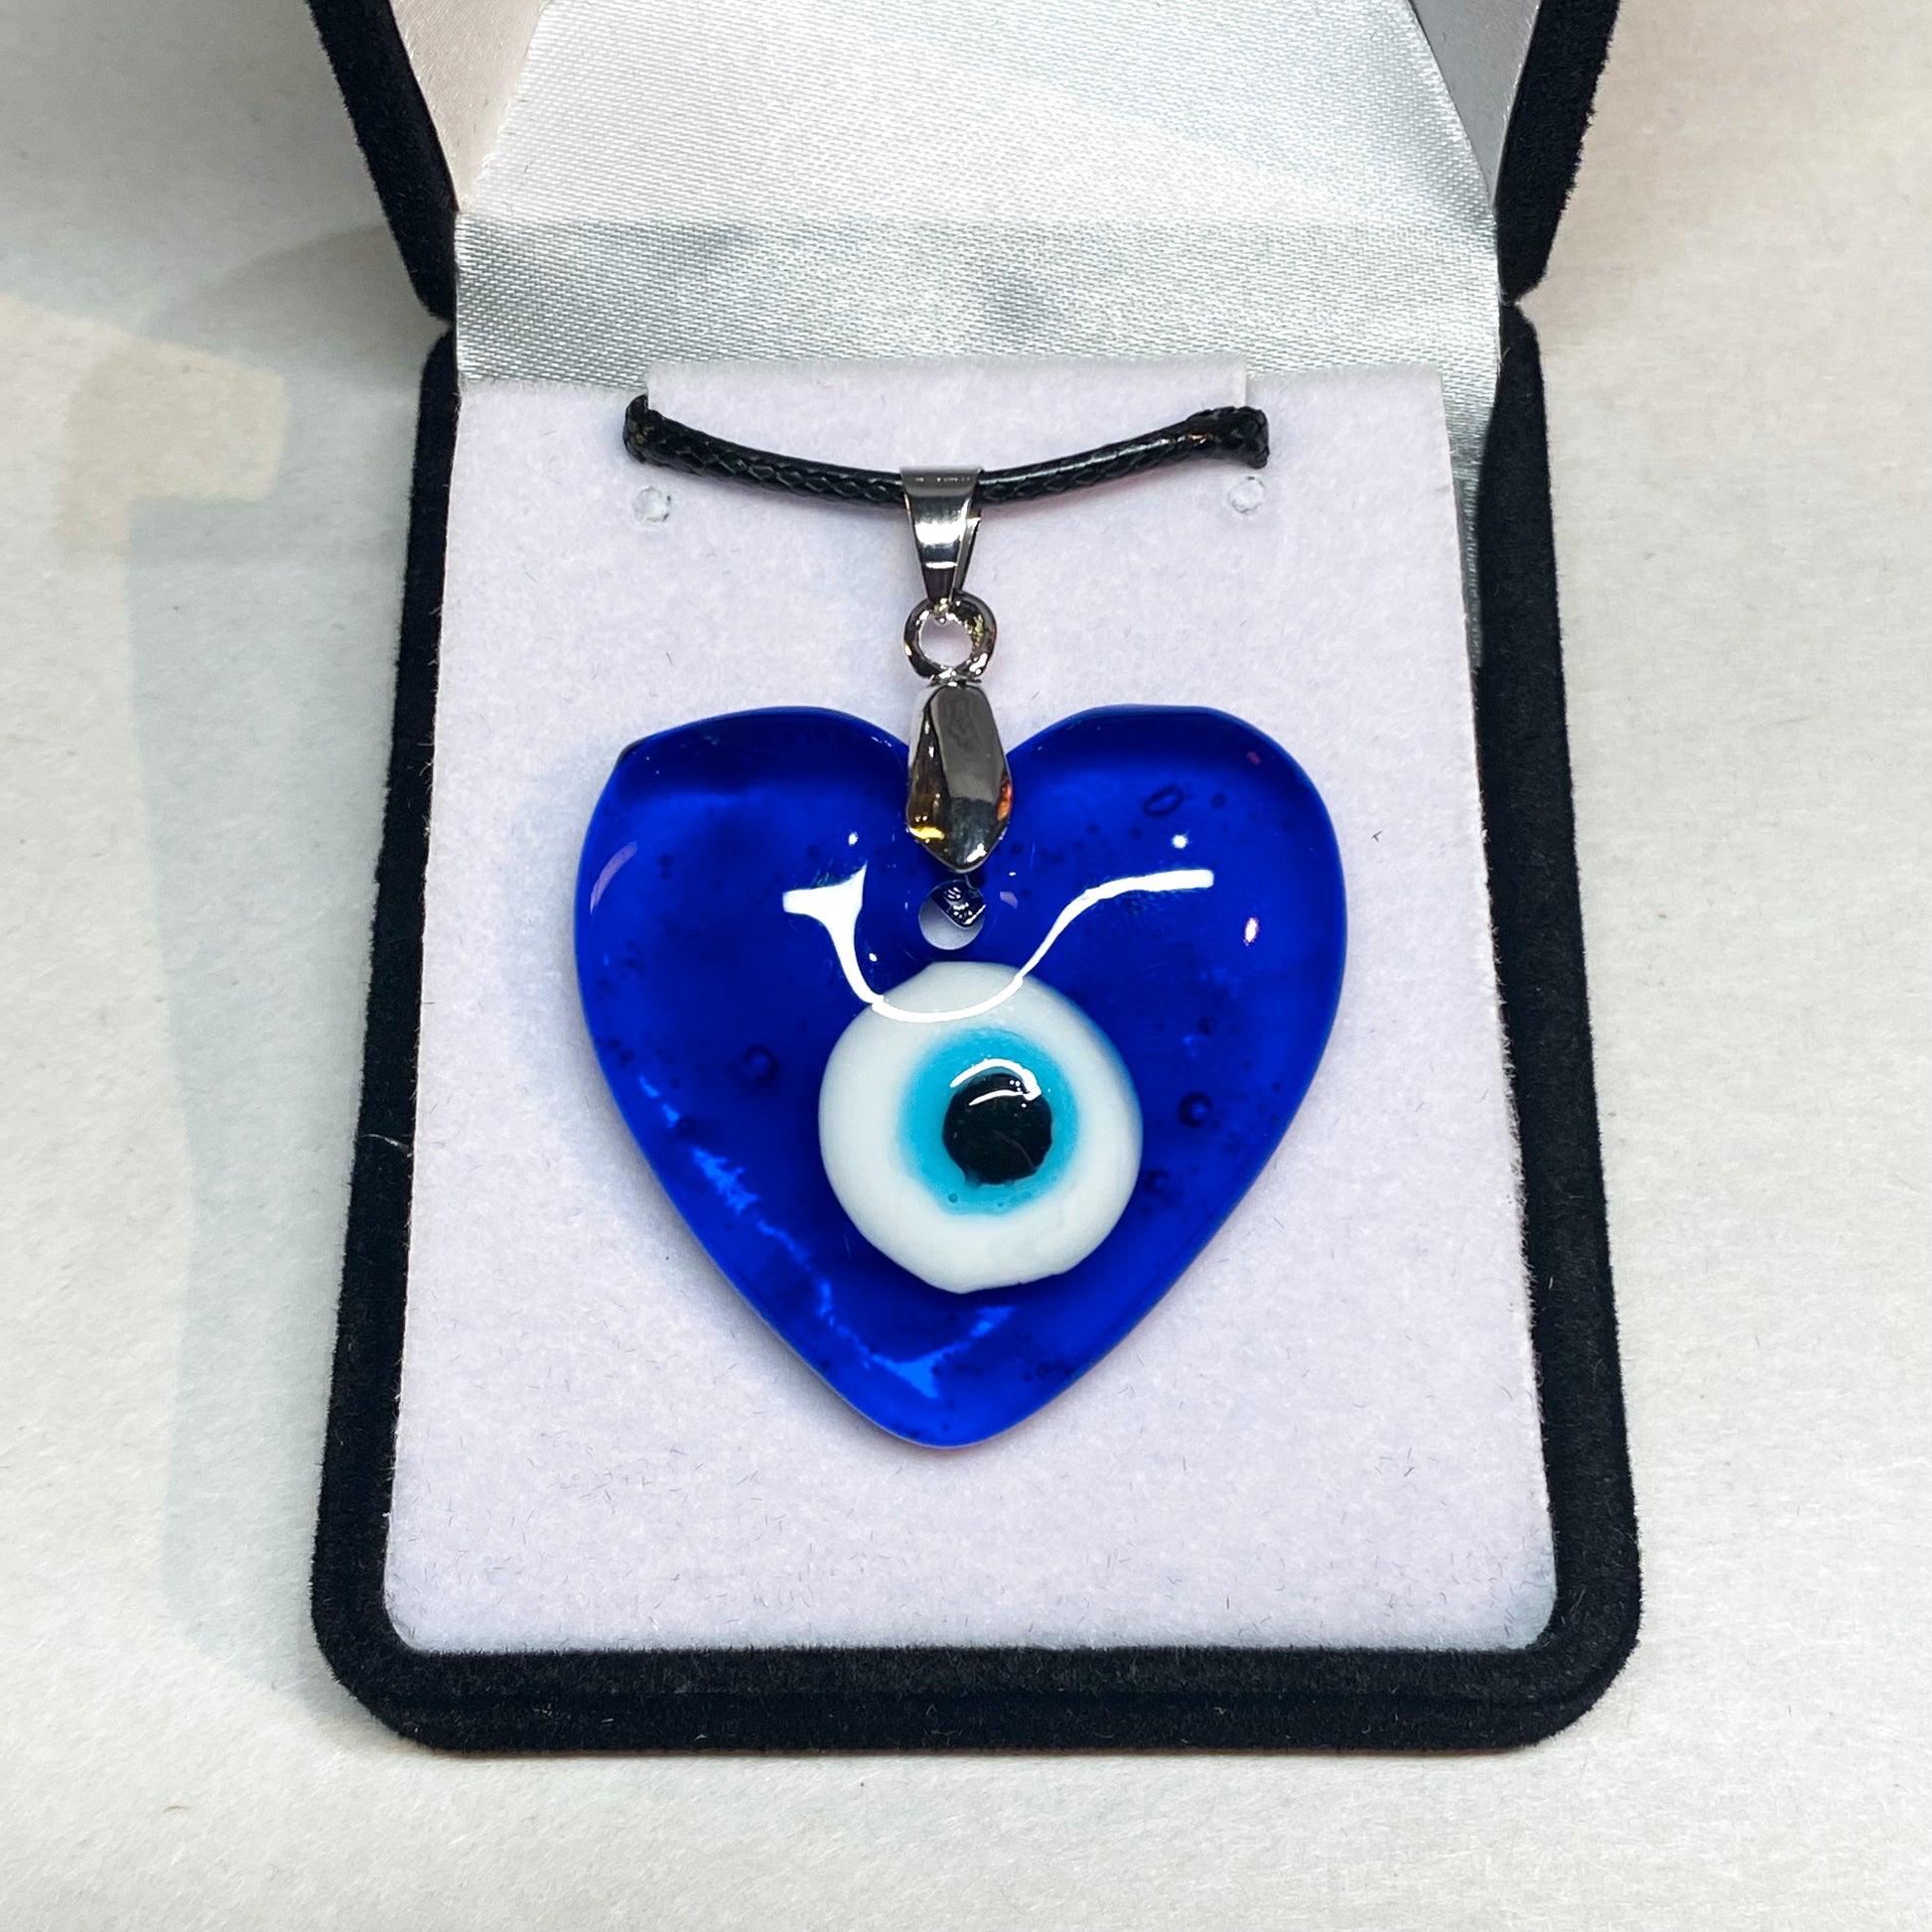 Evil Eye Heart Pendant with Waxed Cord - Rivendell Shop